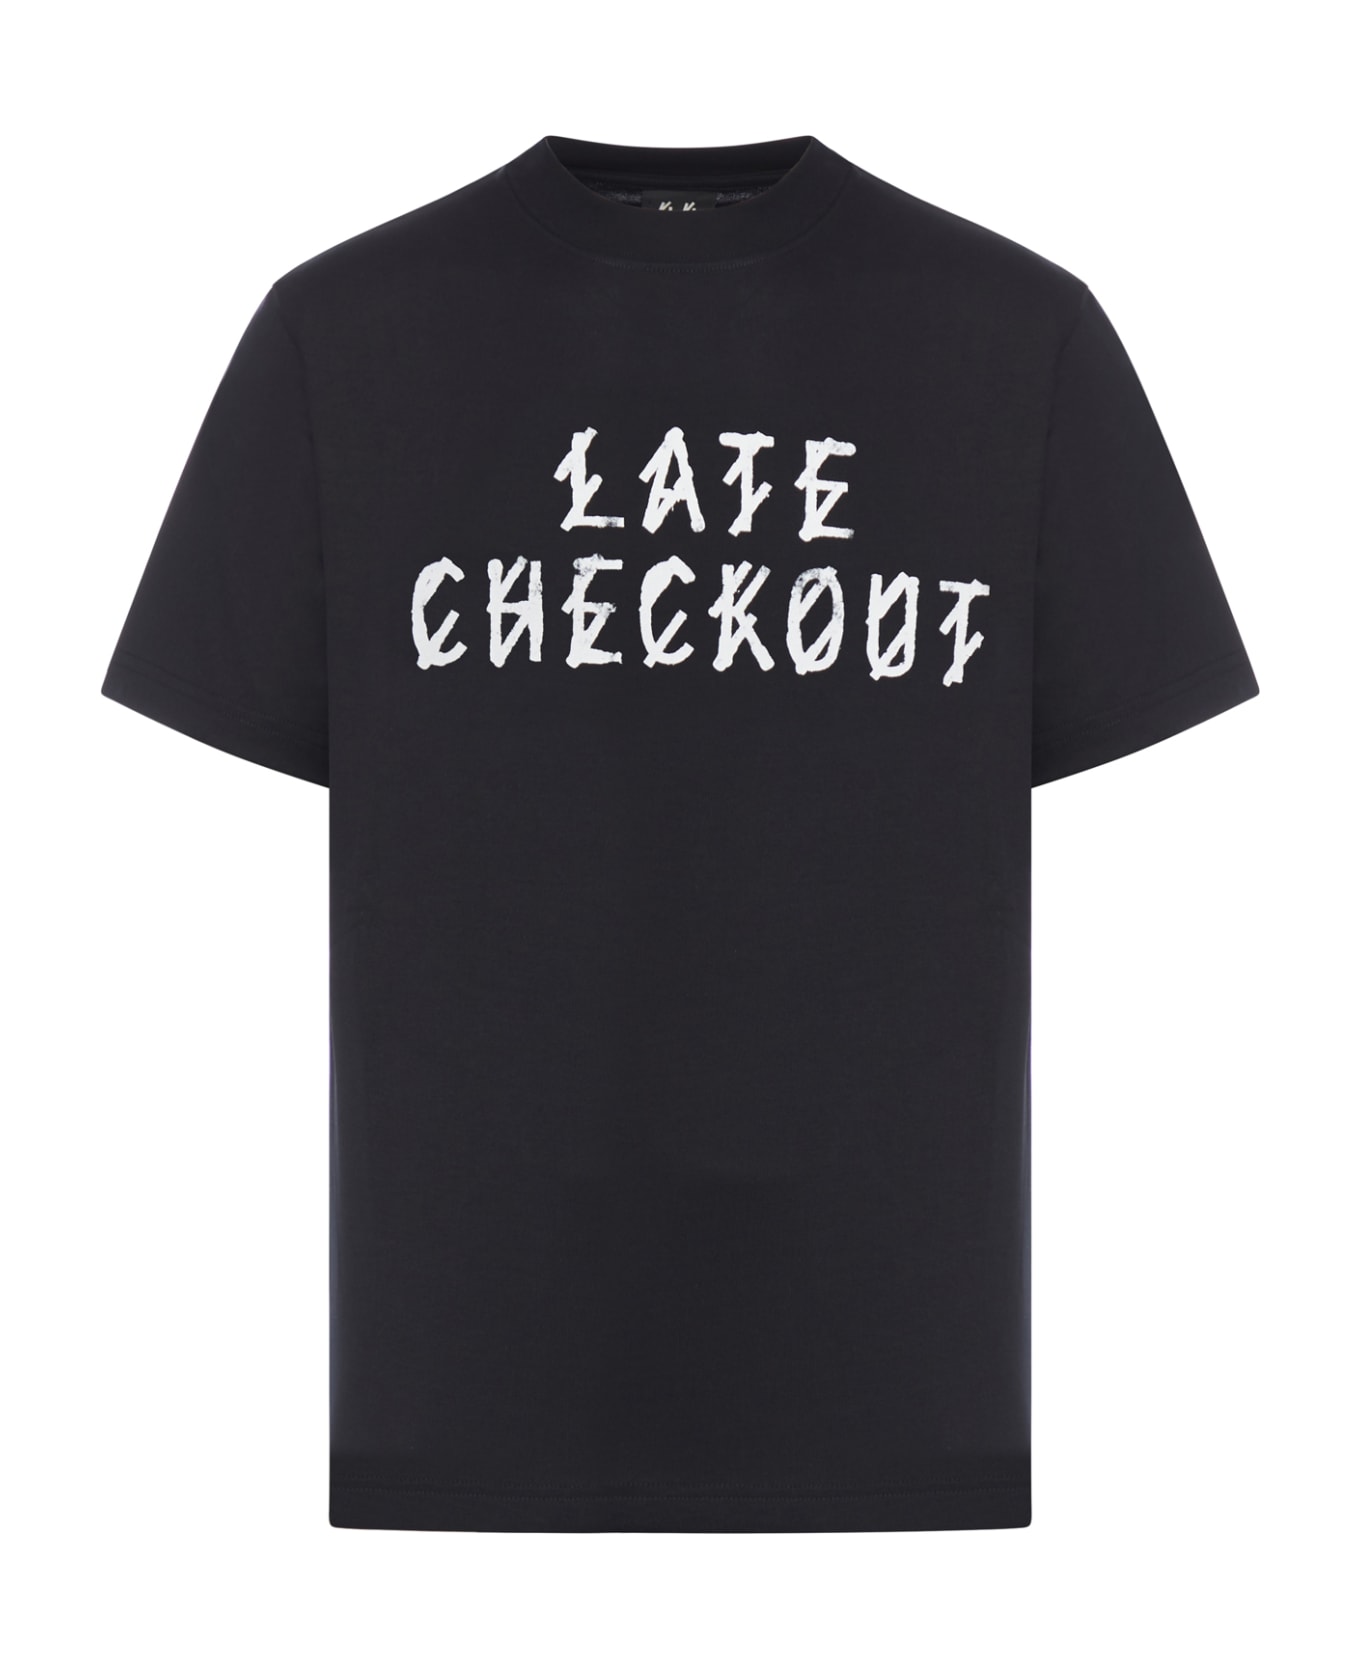 44 Label Group Room 44 Tee - Black Late Checkout